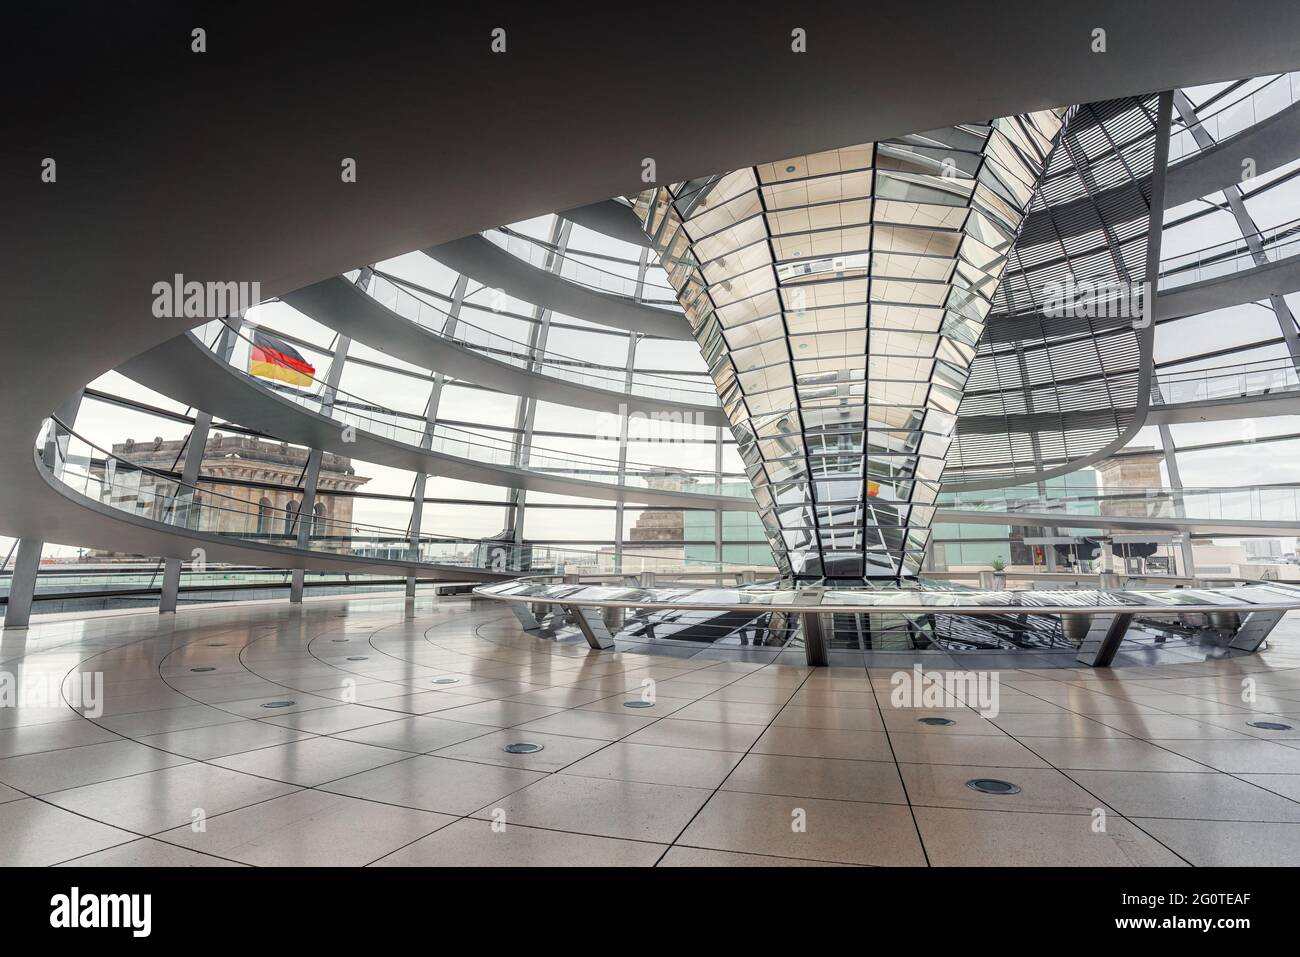 Interior of the Glass Dome of the German Parliament (Bundestag) - Reichstag Building - Berlin, Germany Stock Photo